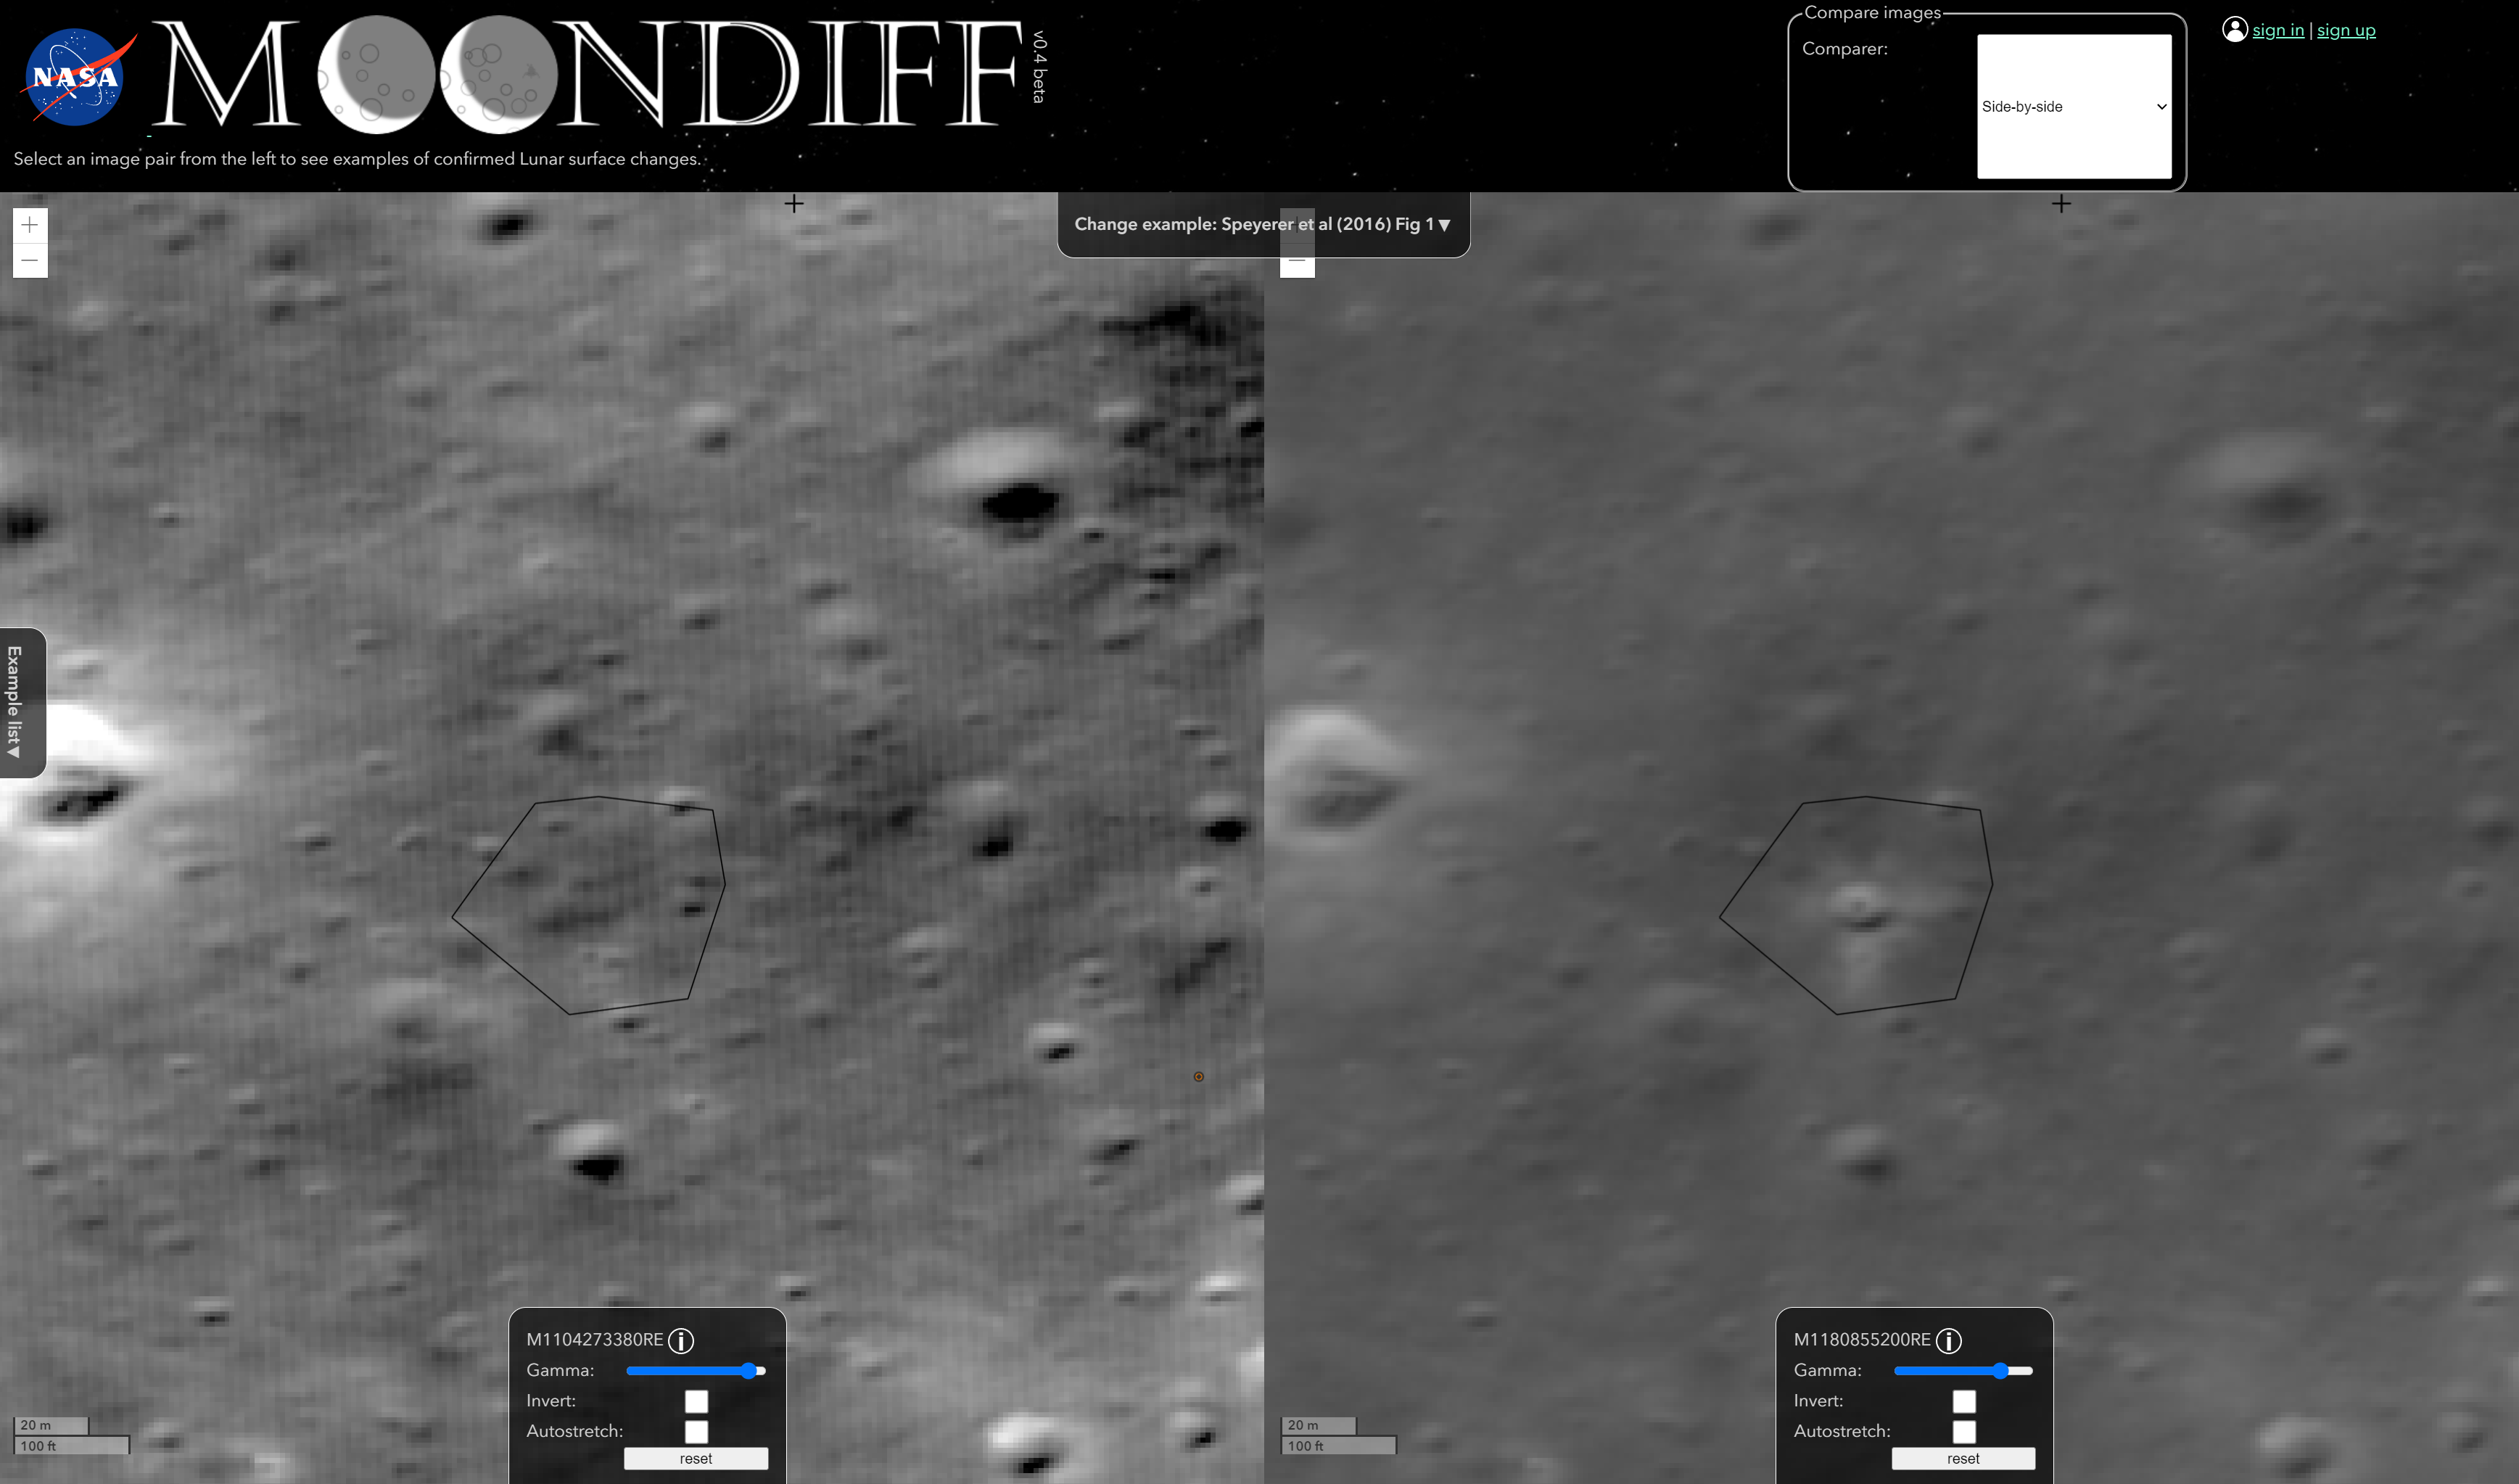 A screenshot of the MoonDiff website with two images, side by side. The image of the moon on the left is lighter than the image of the moon on the right and there is a new impact crater highlighted in the right image.